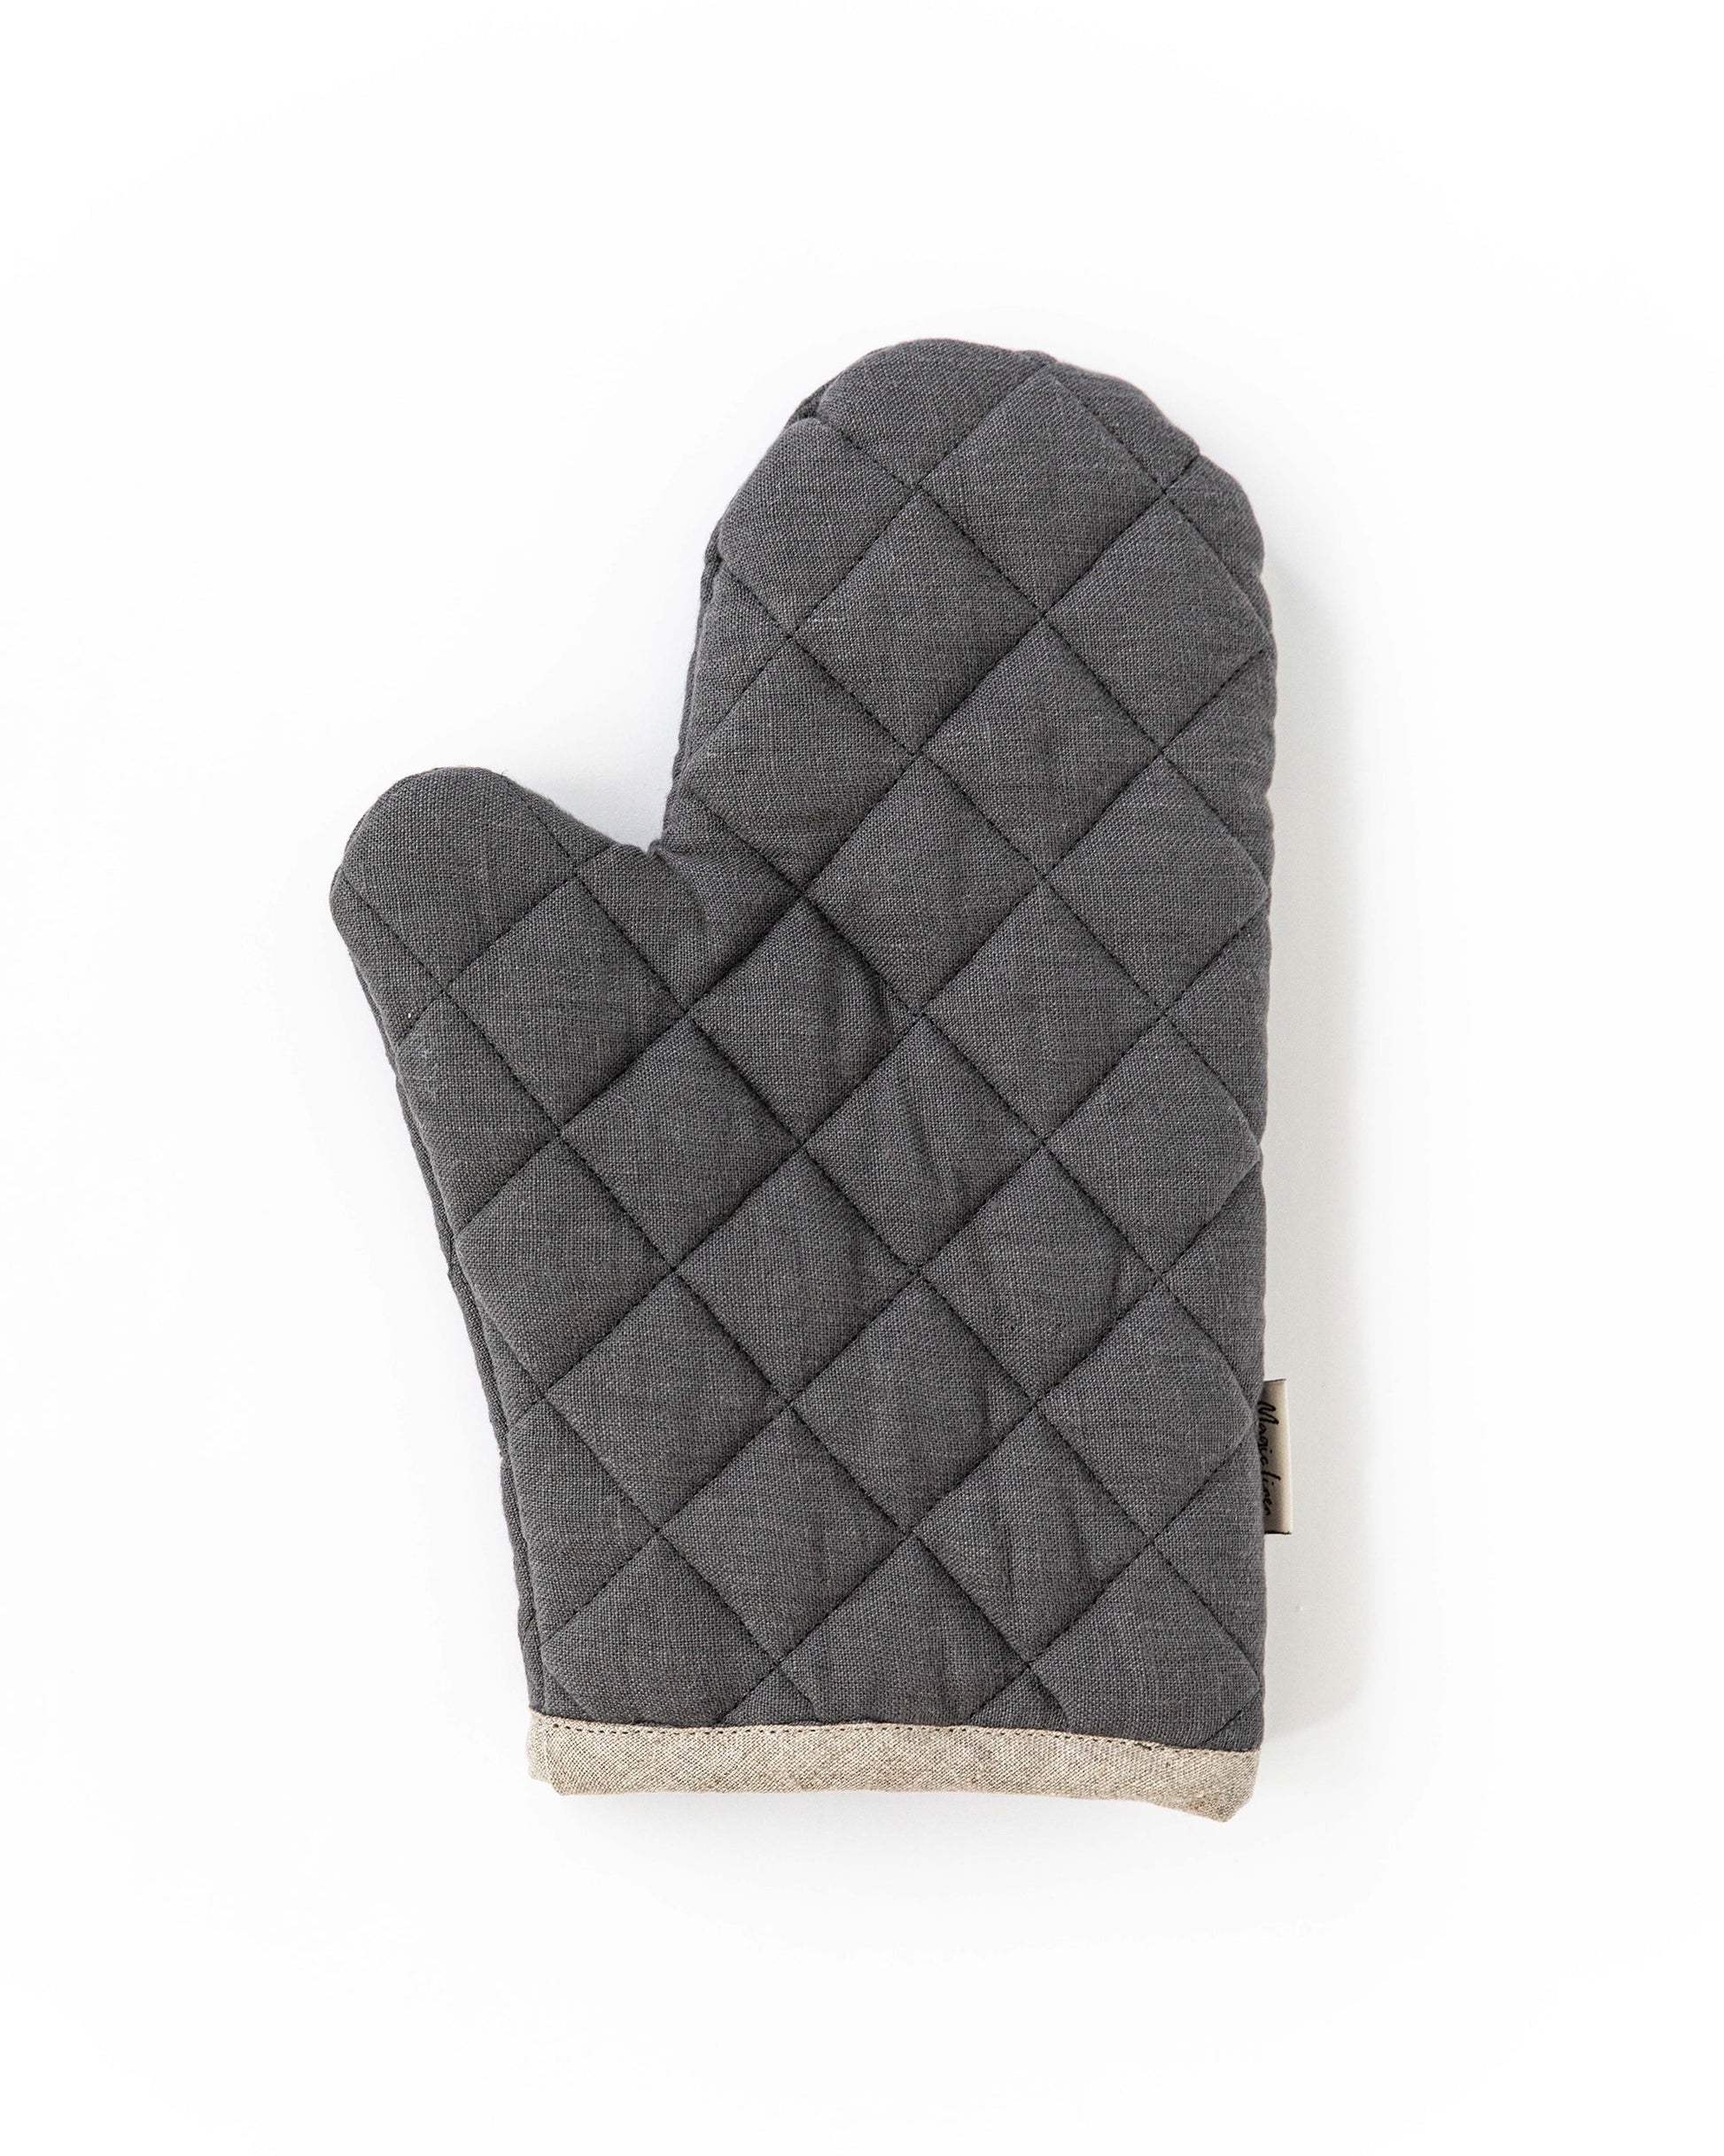 Food52 Linen Cotton Oven Mitts, Set of 2 - Marigold